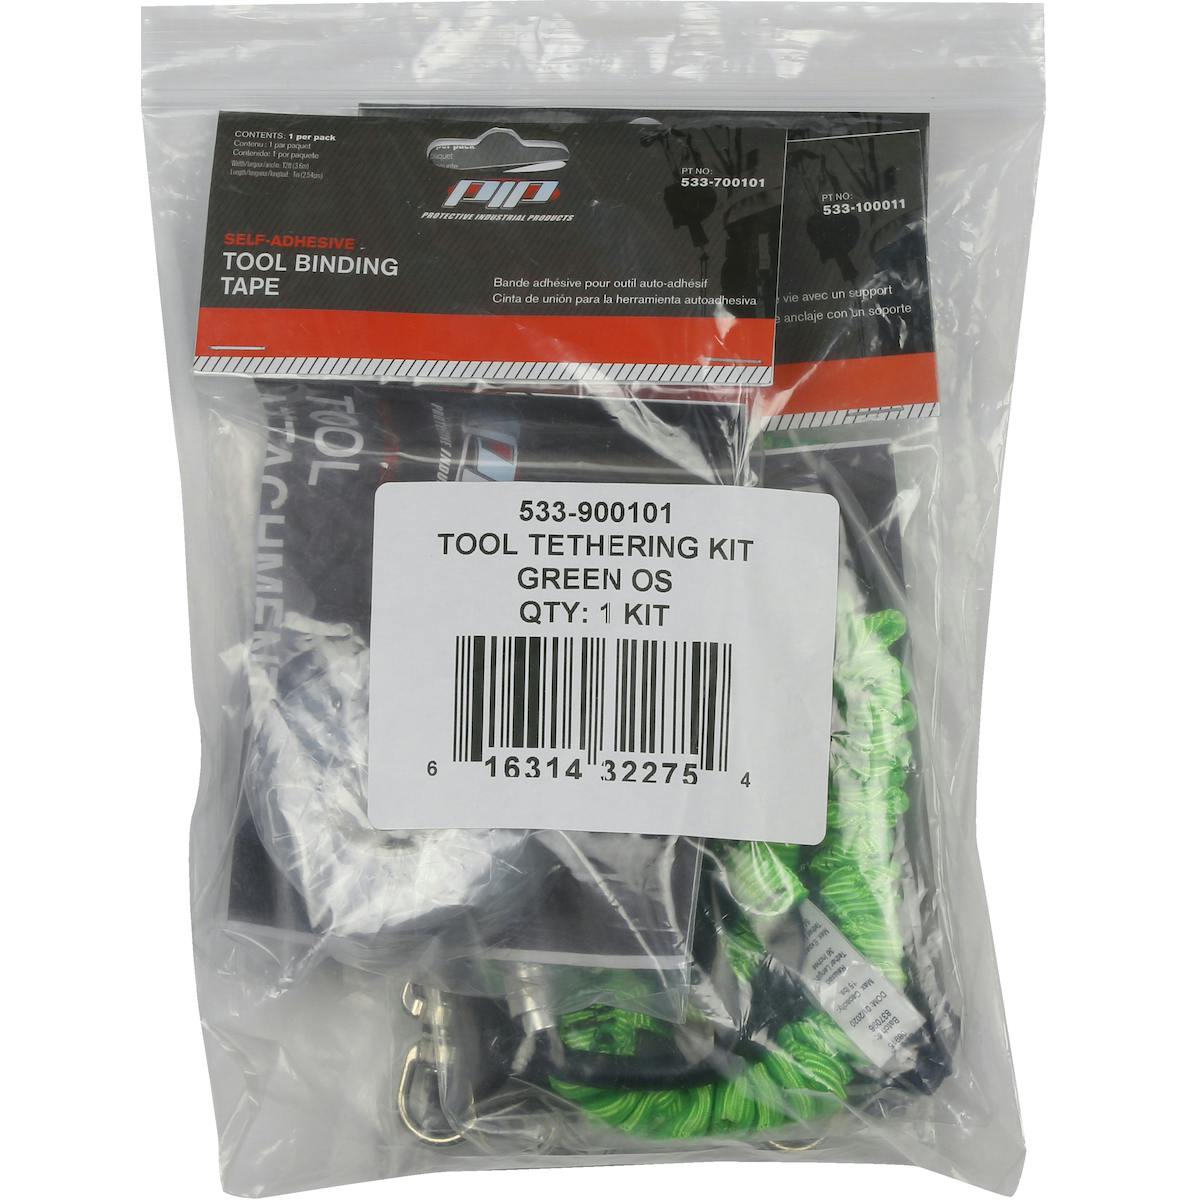 Tool Tethering Kit - includes single leg lanyard, tool connectors, and tool tape - Retail Packed, Green (533-900101) - OS_4